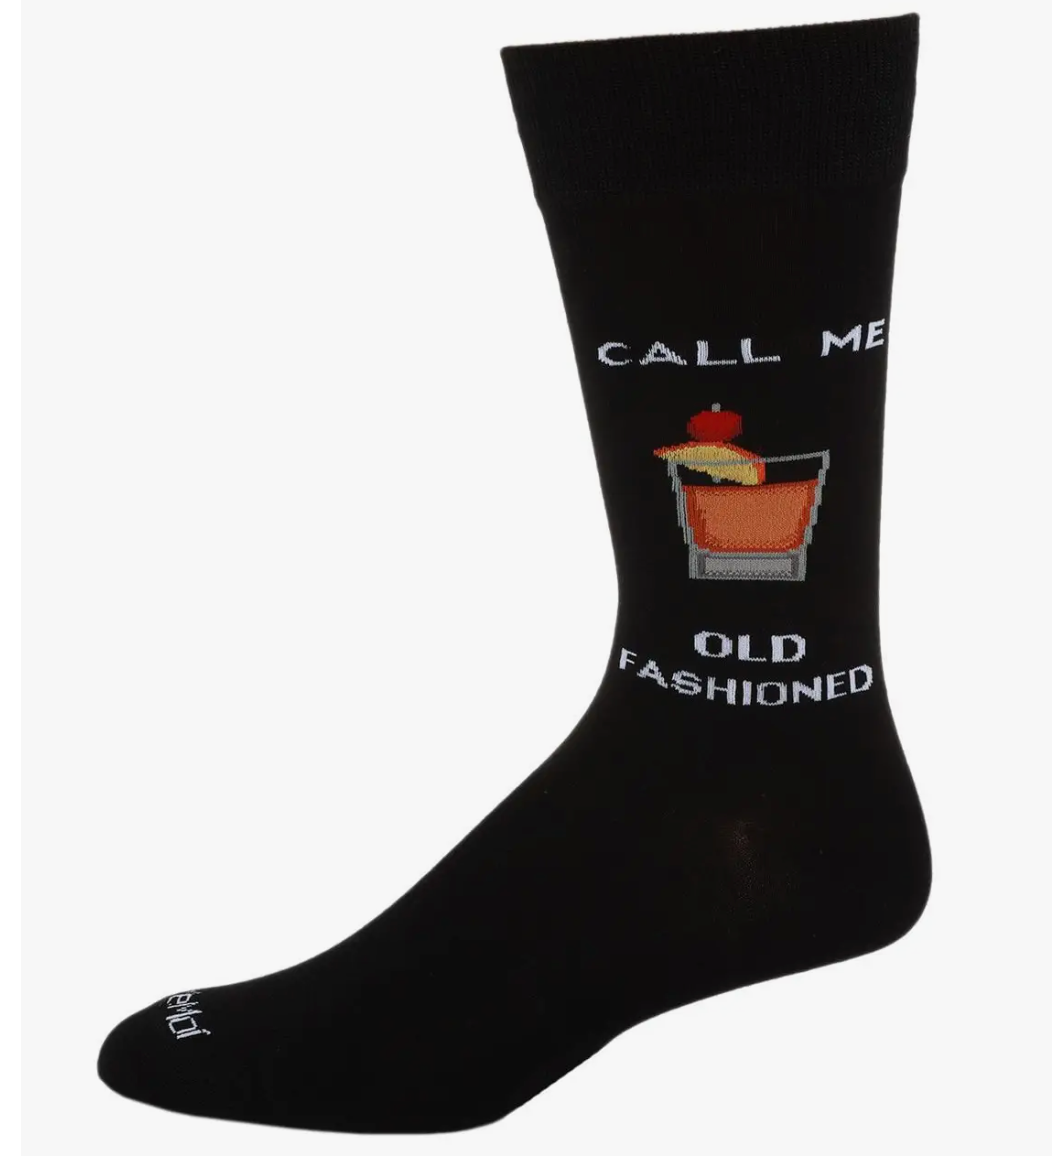 Men's "Call me old fashioned" novelty socks